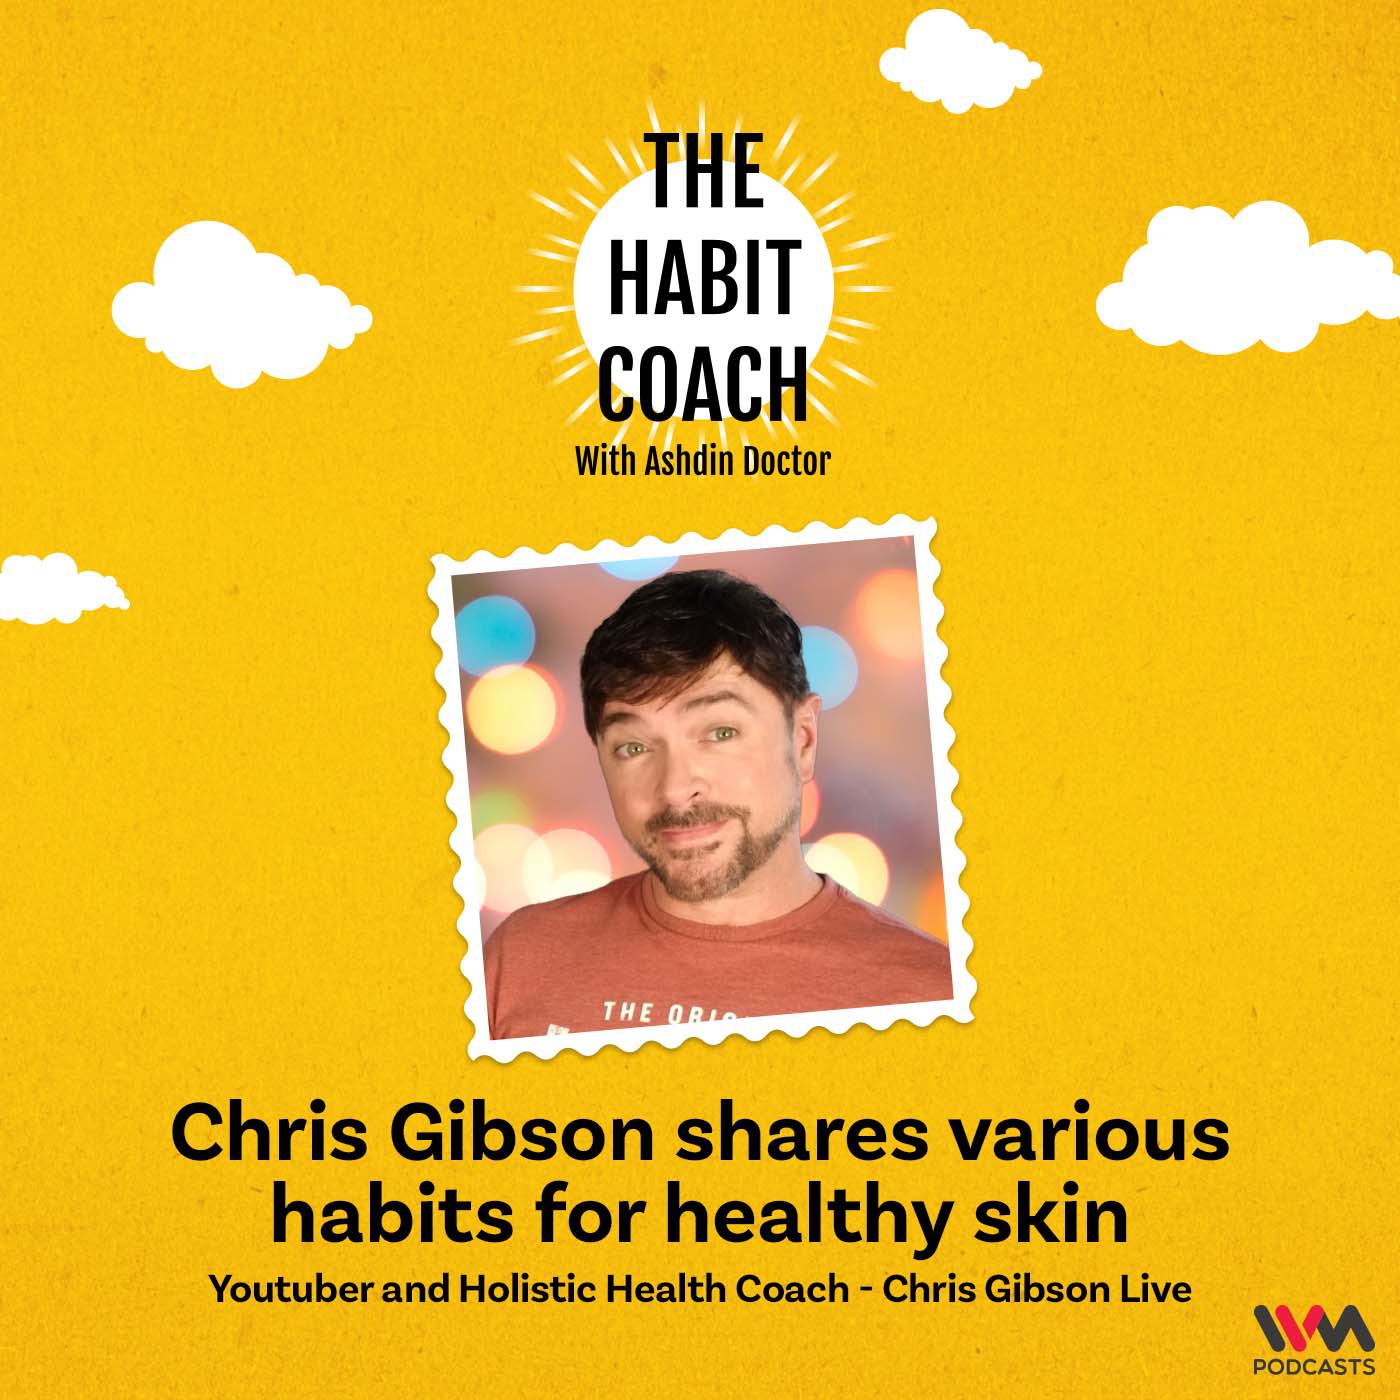 Chris Gibson shares various habits for healthy skin